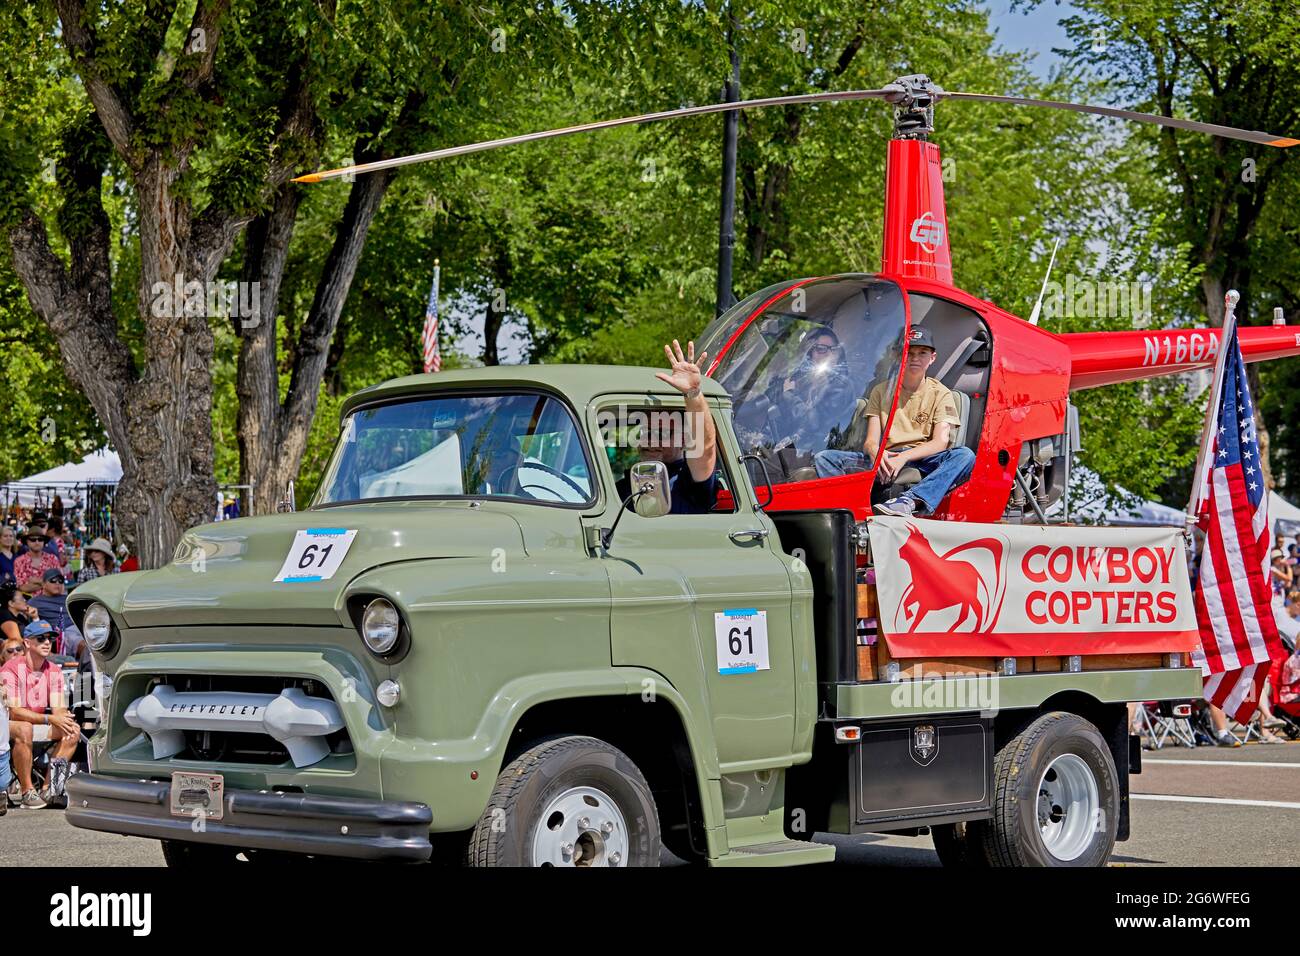 Prescott, Arizona, USA - July 3, 2021: Small helicopter used for cattle ranching in the bed of an old pick up truck in 4th of July parade Stock Photo